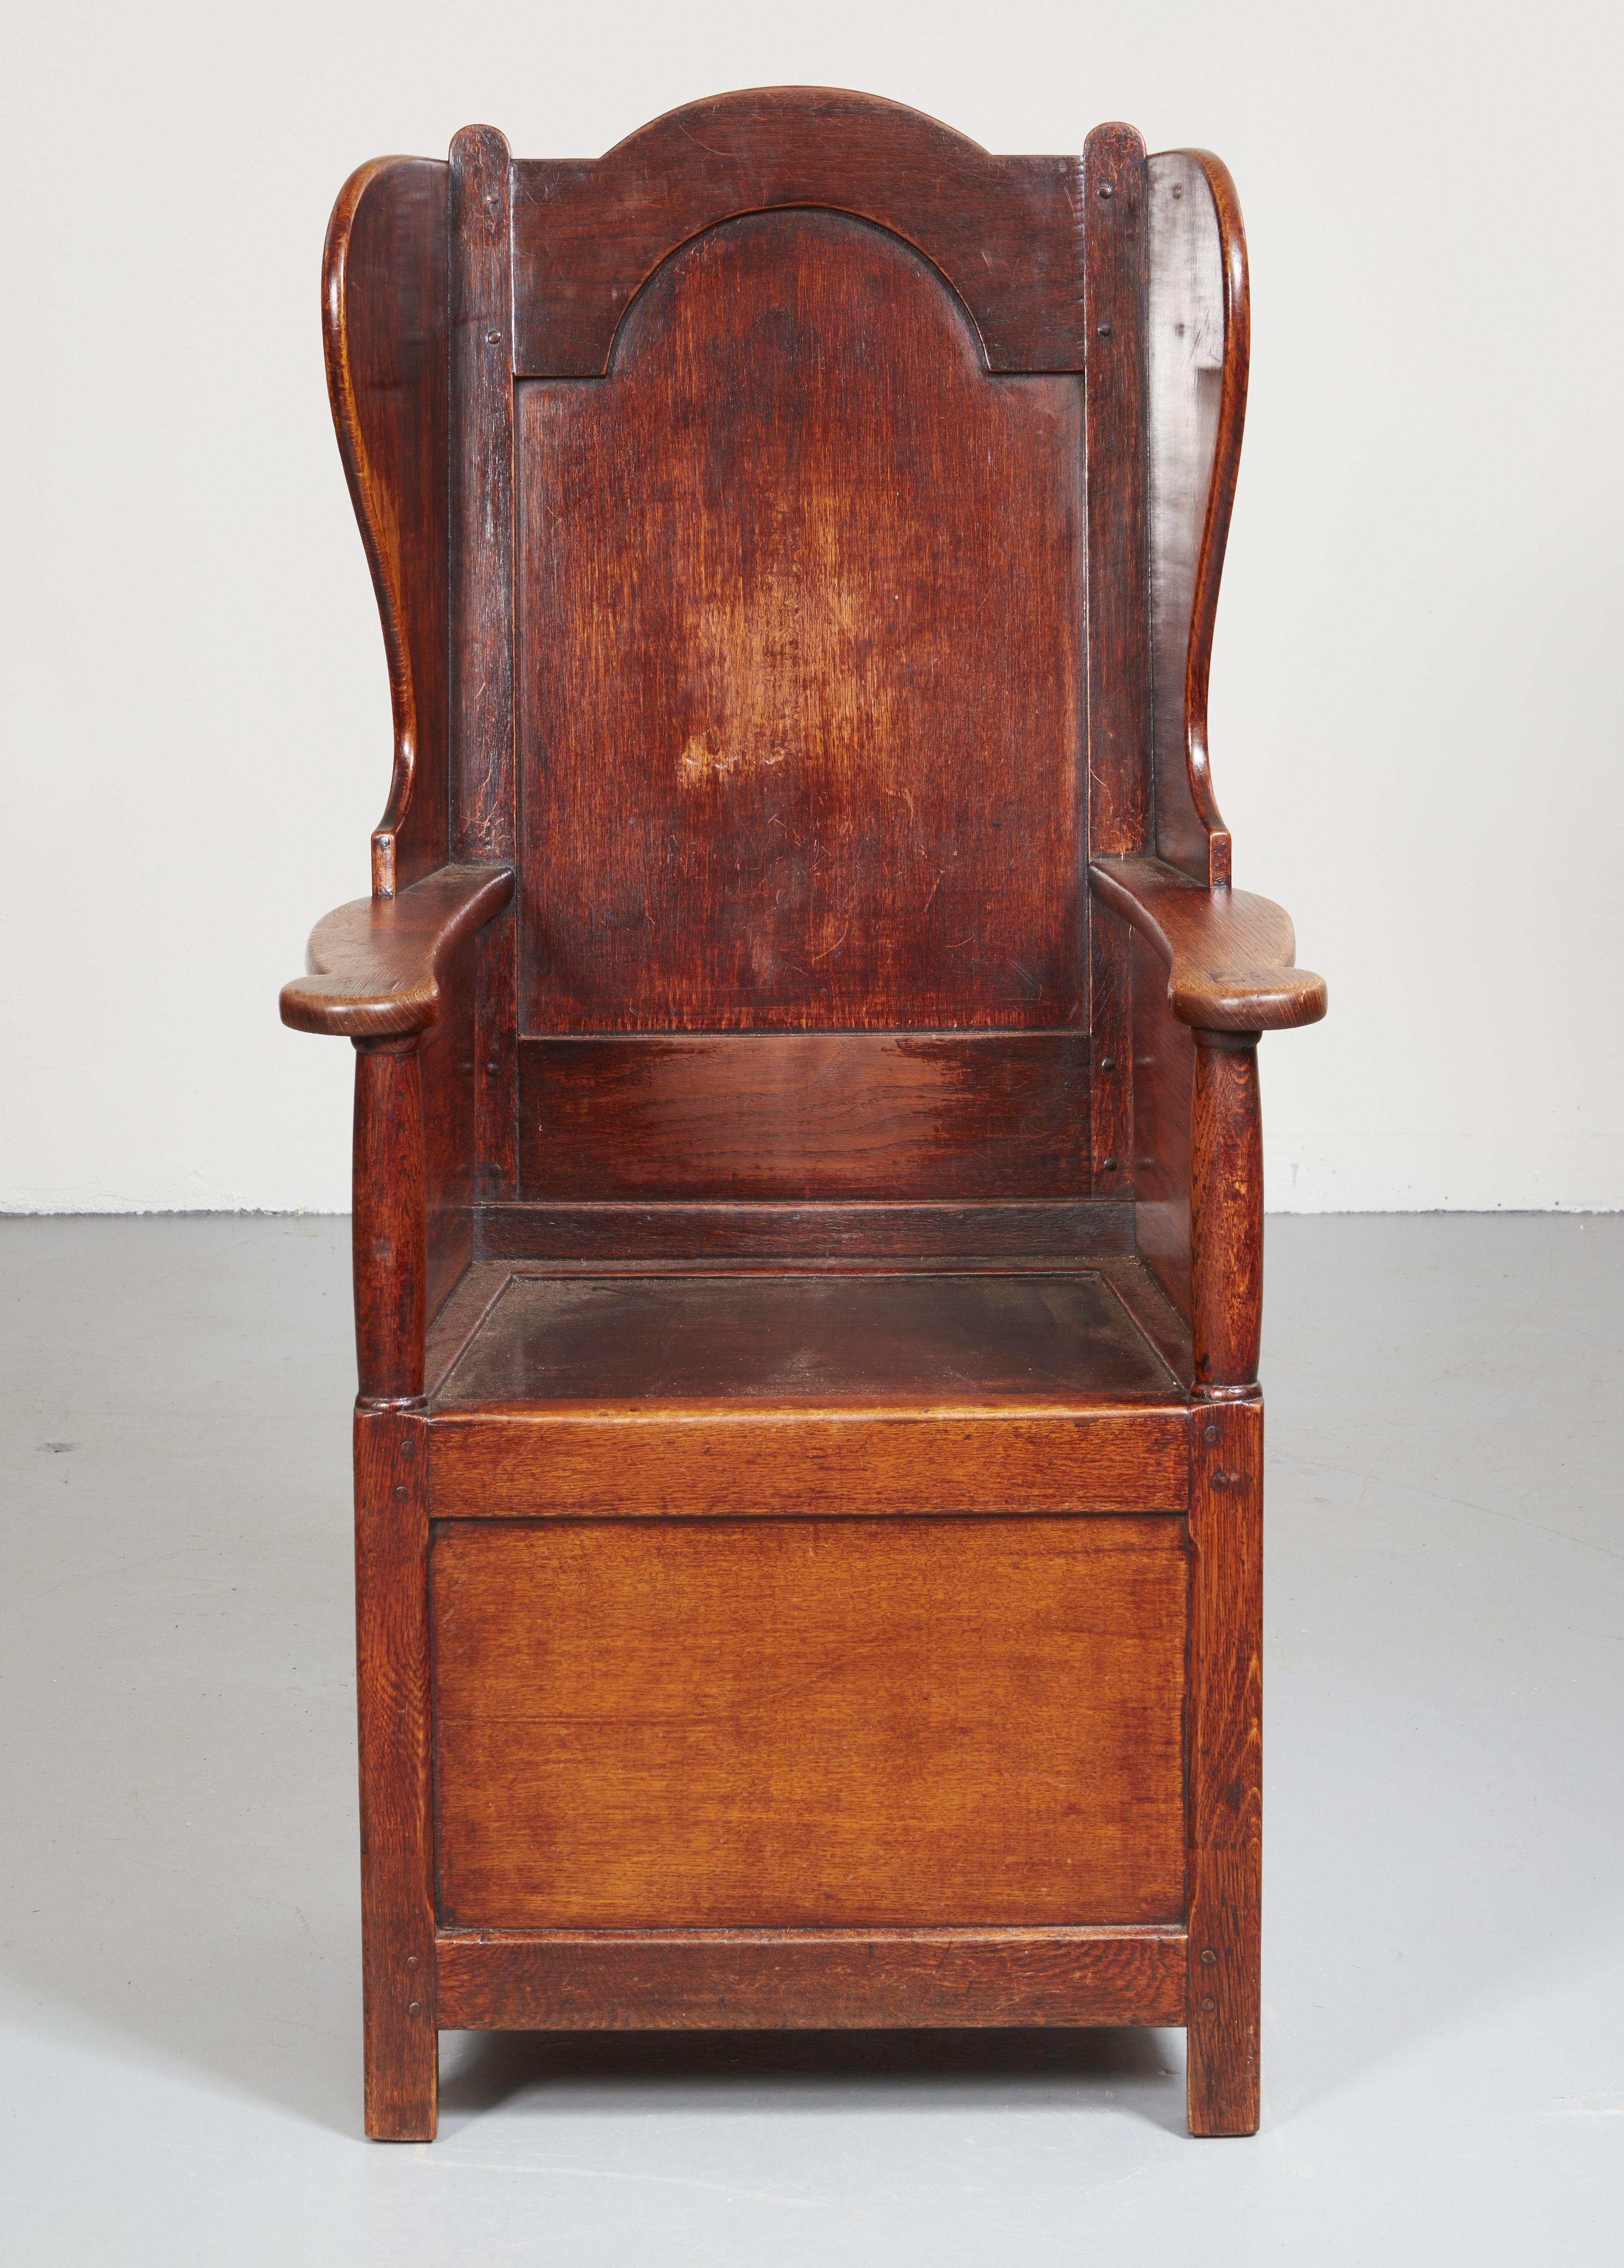 An early 19th century oak Welsh lambing chair with very good color. Paneled back and sides, shaped top and curved wings on flattened arms with rounded handles on box base standing on stile legs. A distinguished chair that would make an attractive